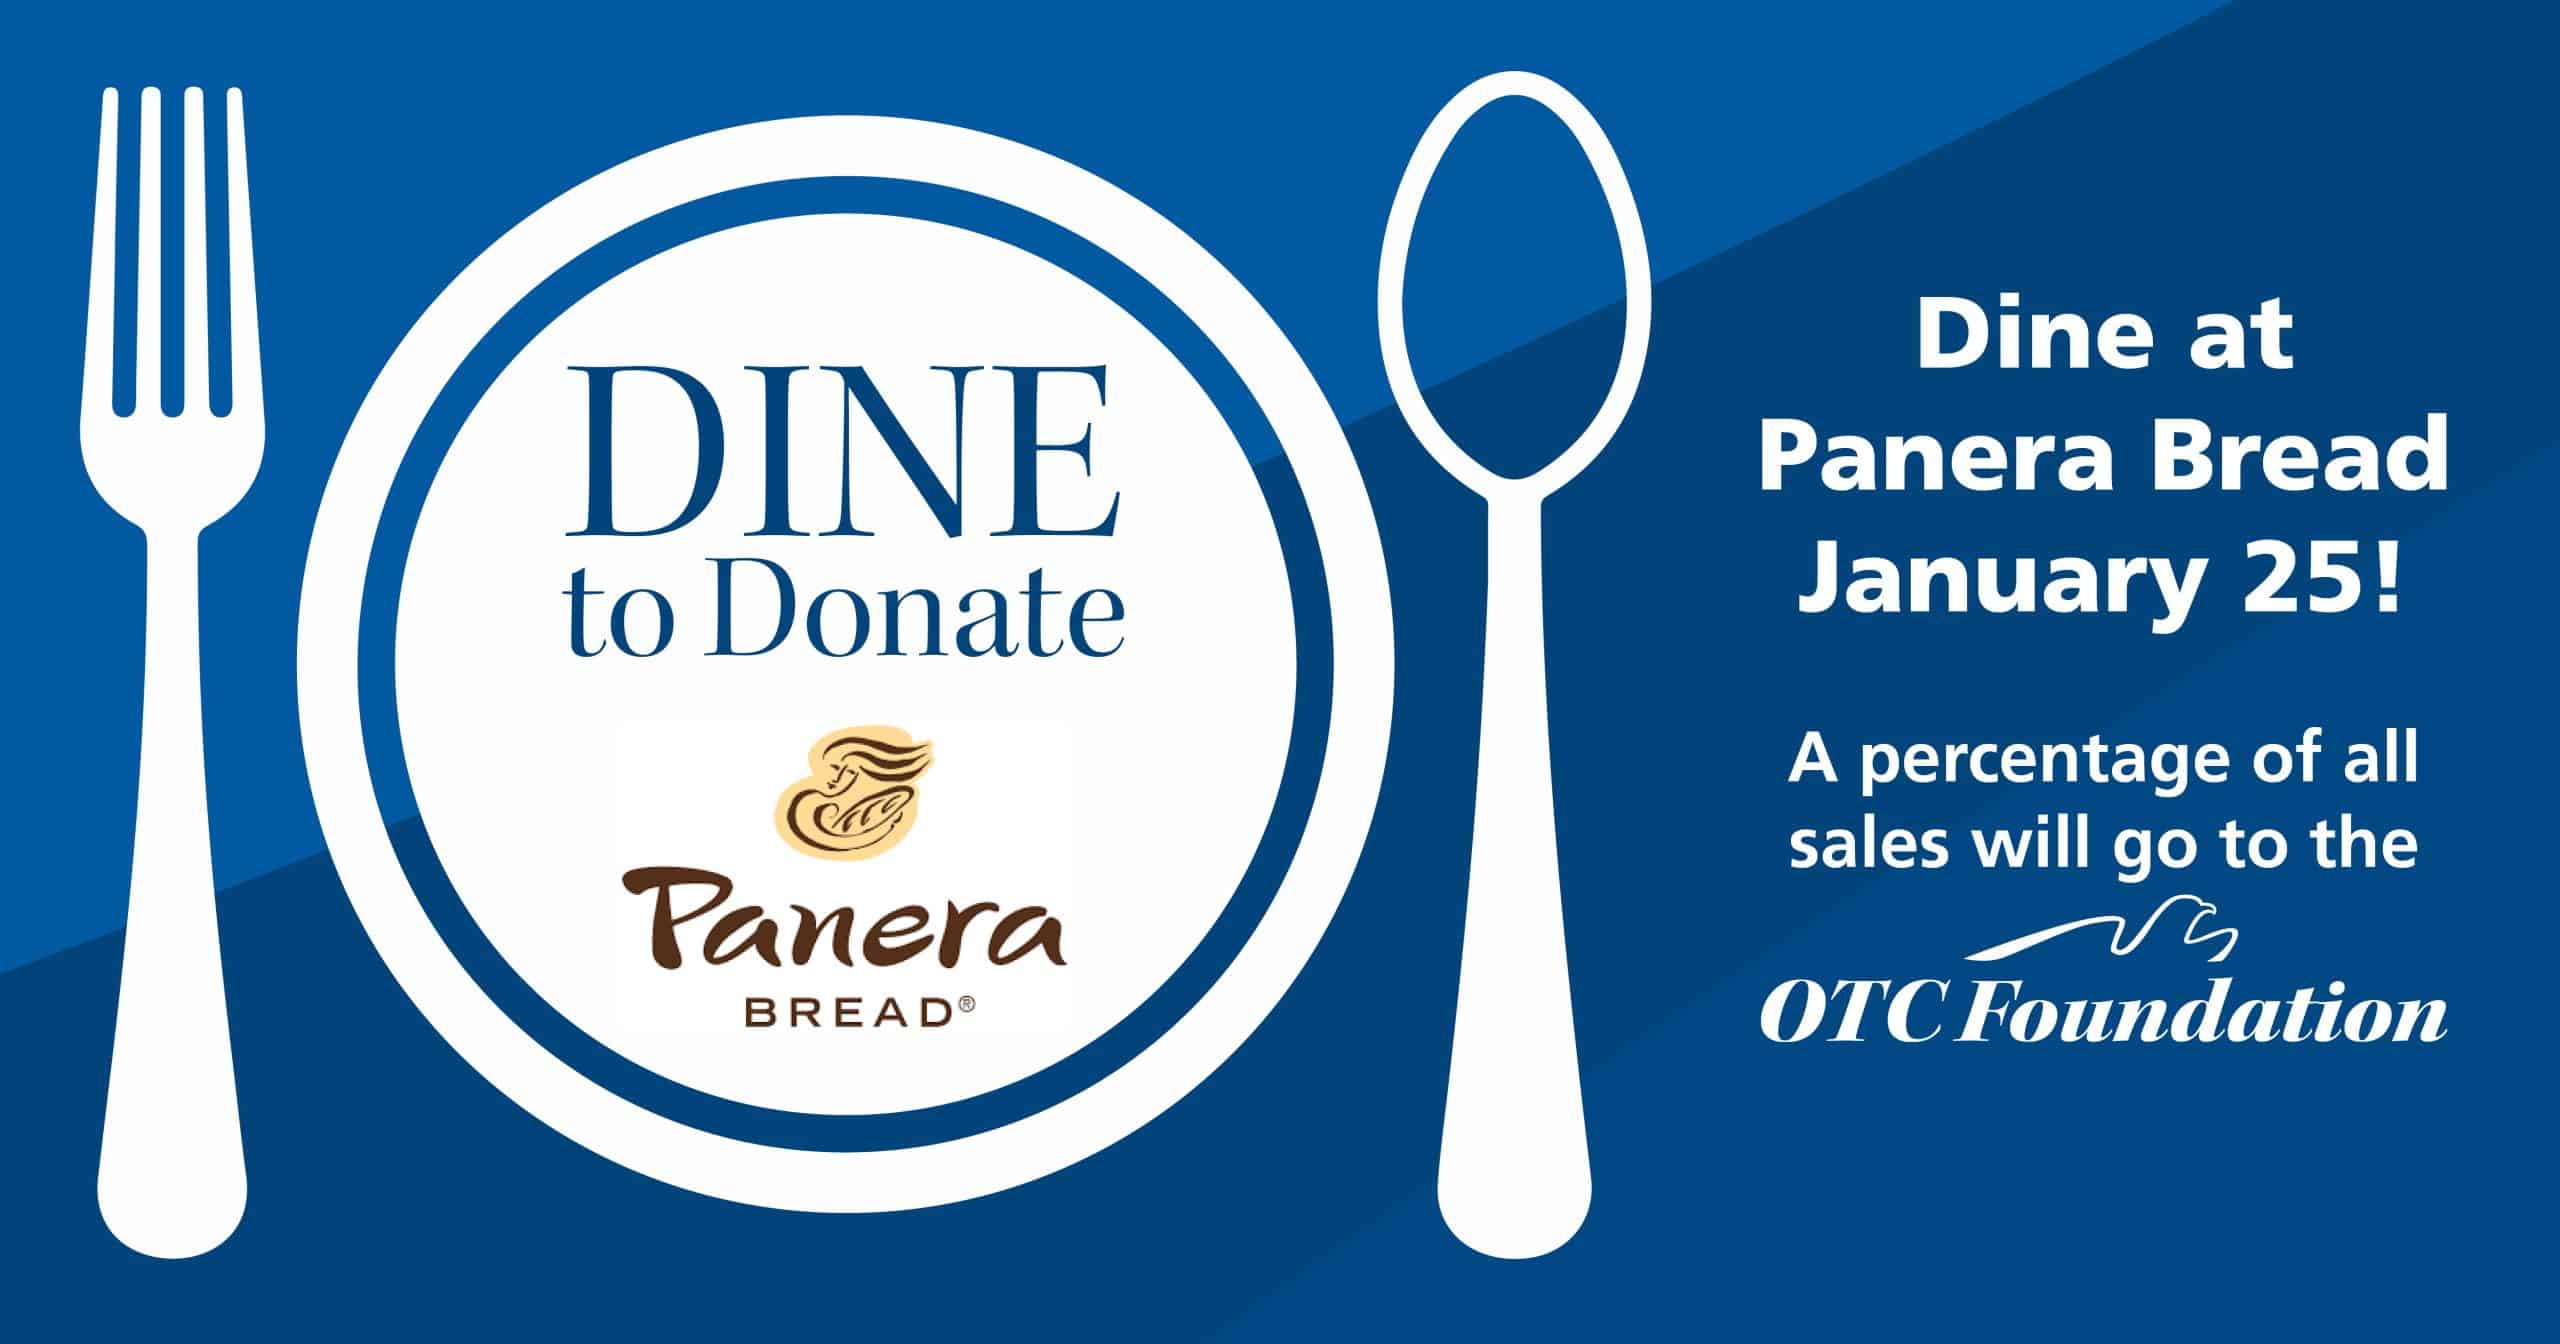 Dine to Donate at Panera Bread